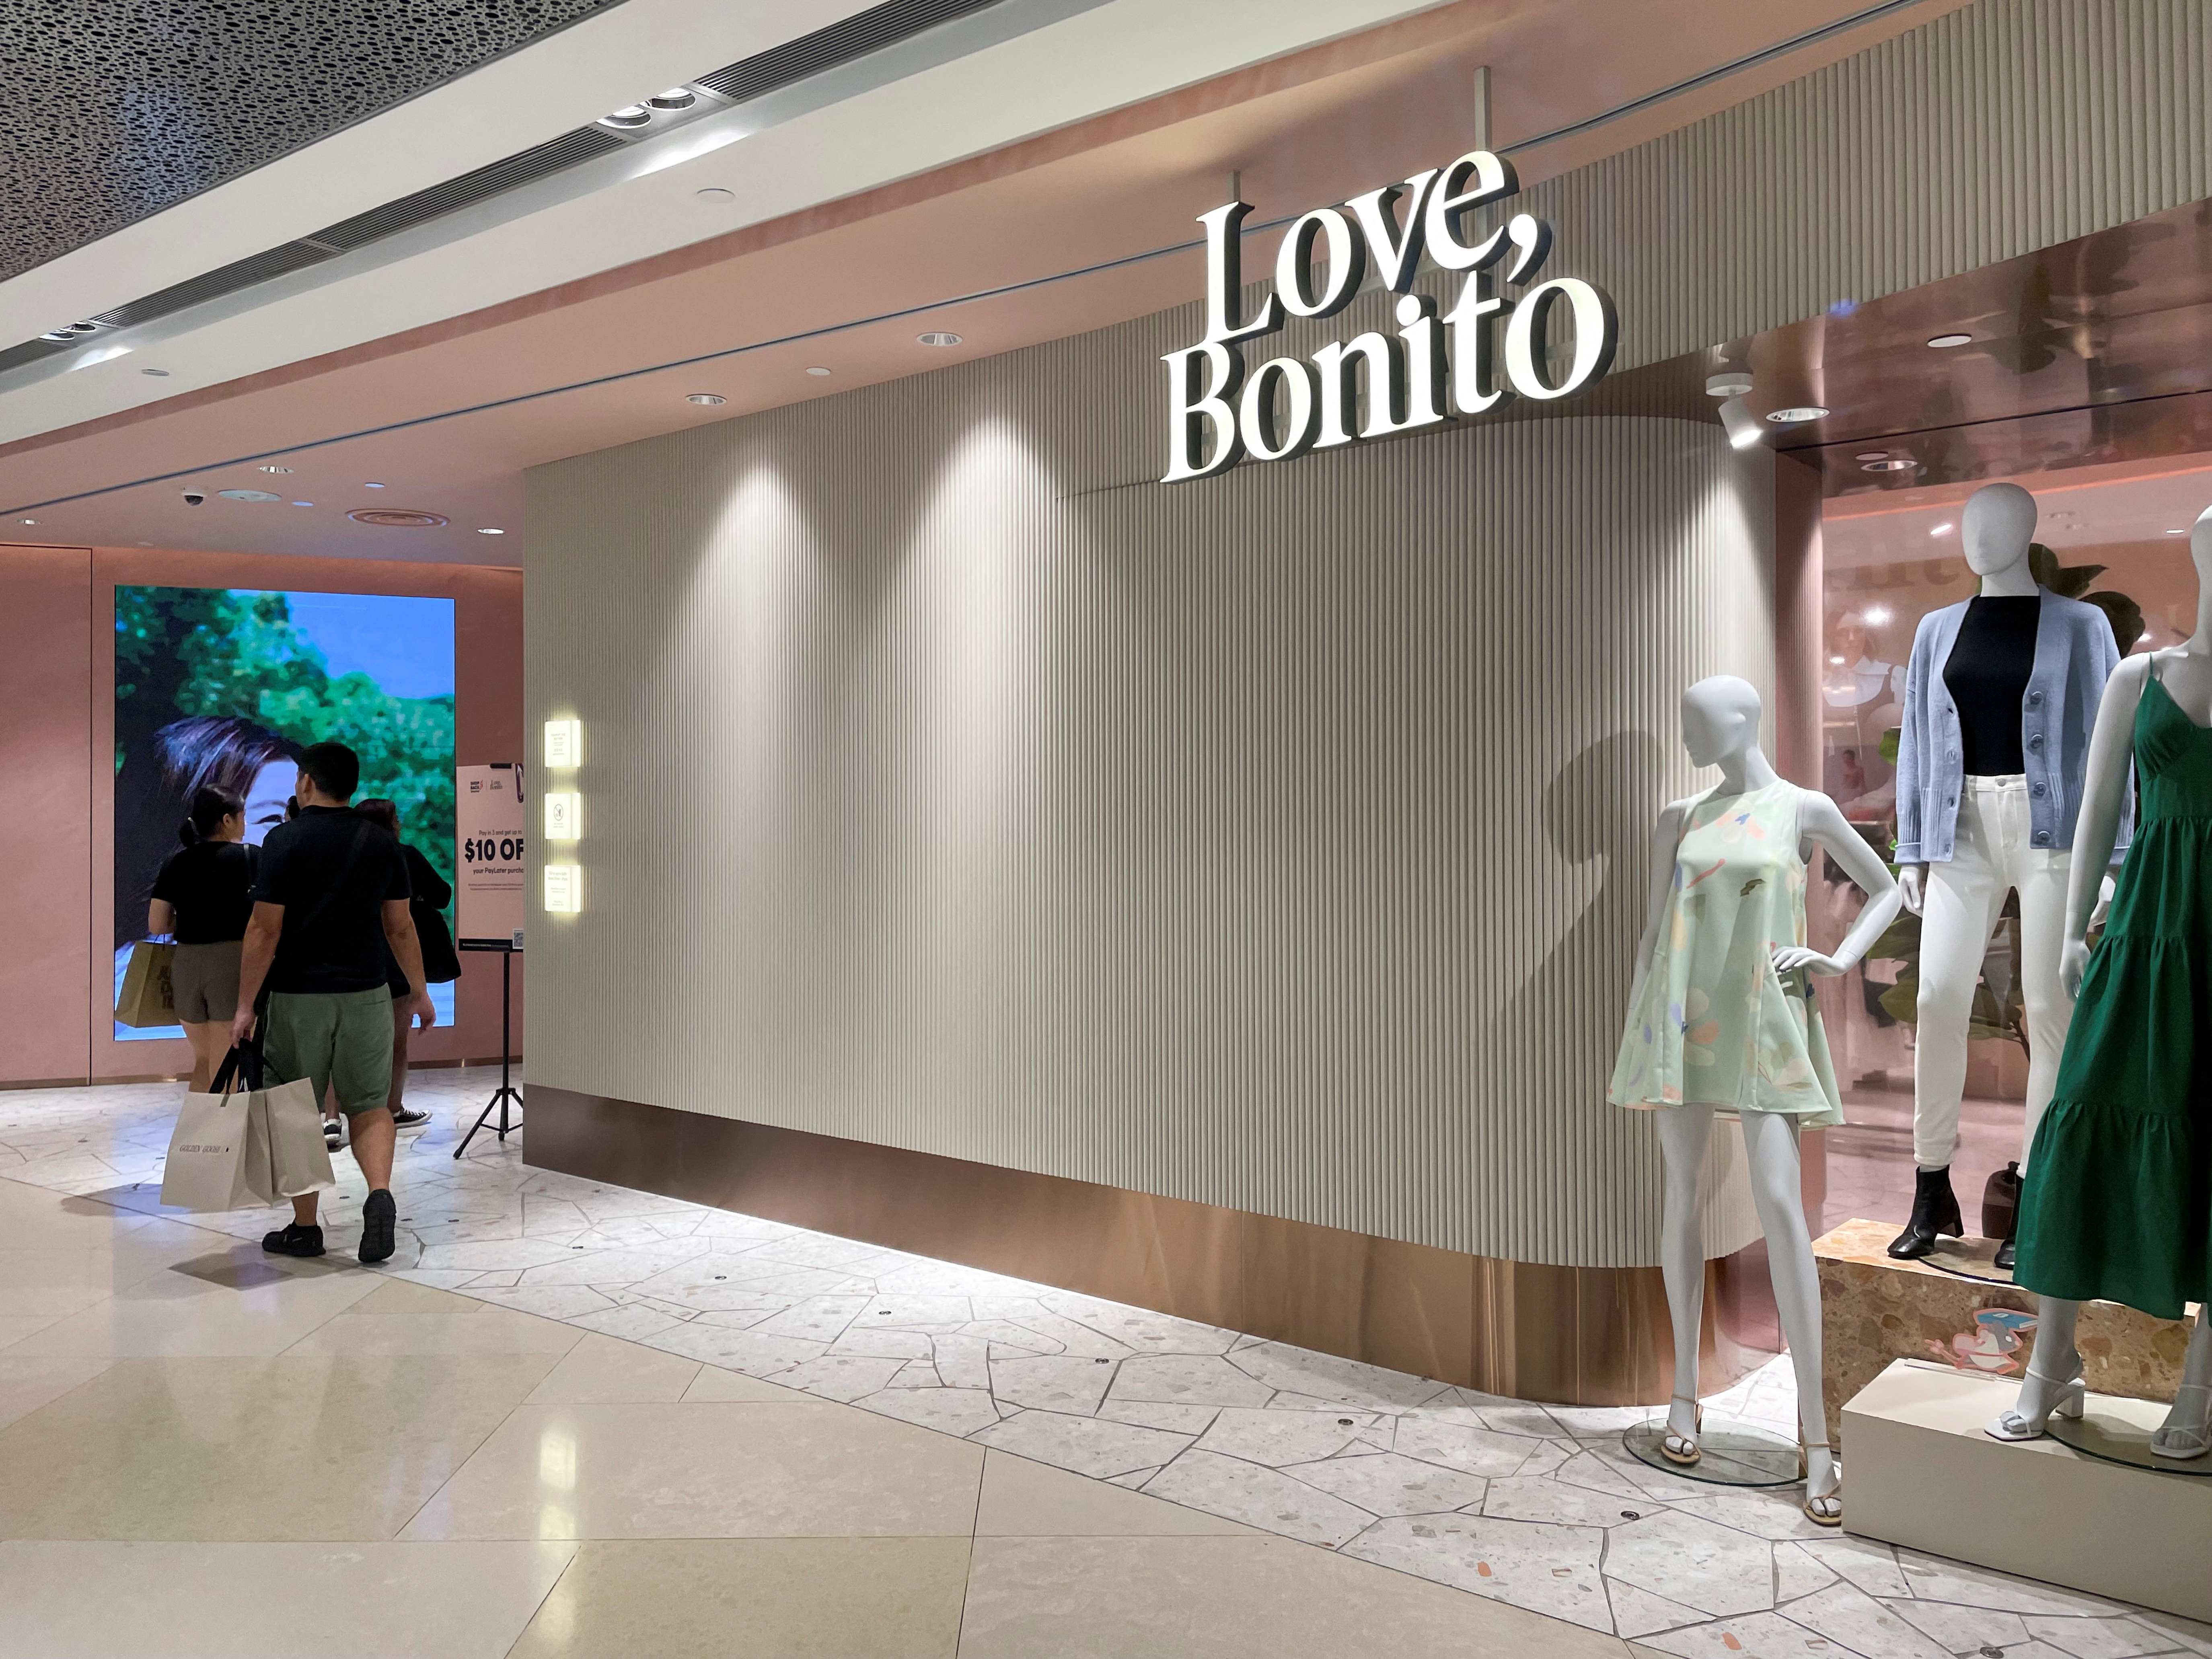 Singapore's Love, Bonito brand owner to open first U.S. store in